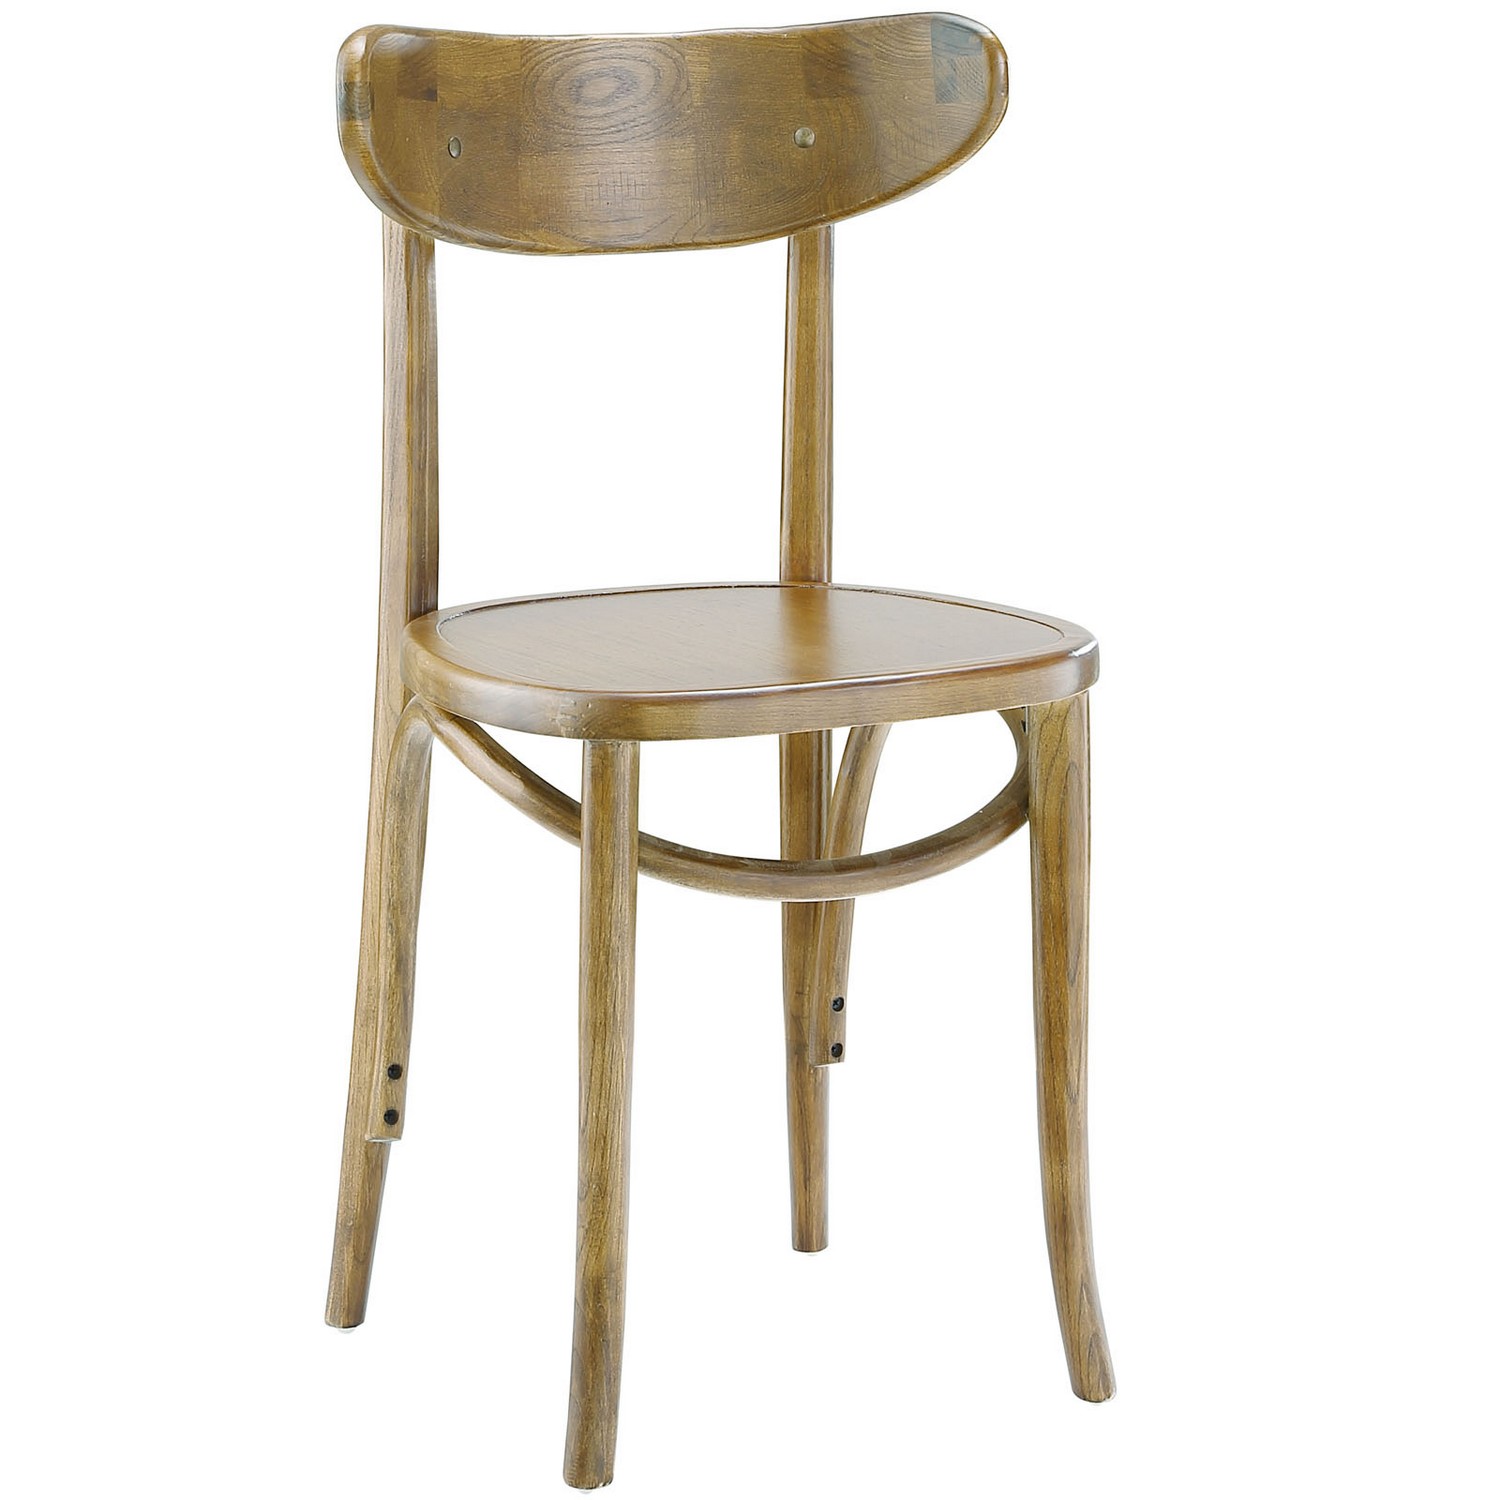 Modway Skate Dining Side Chair - Natural